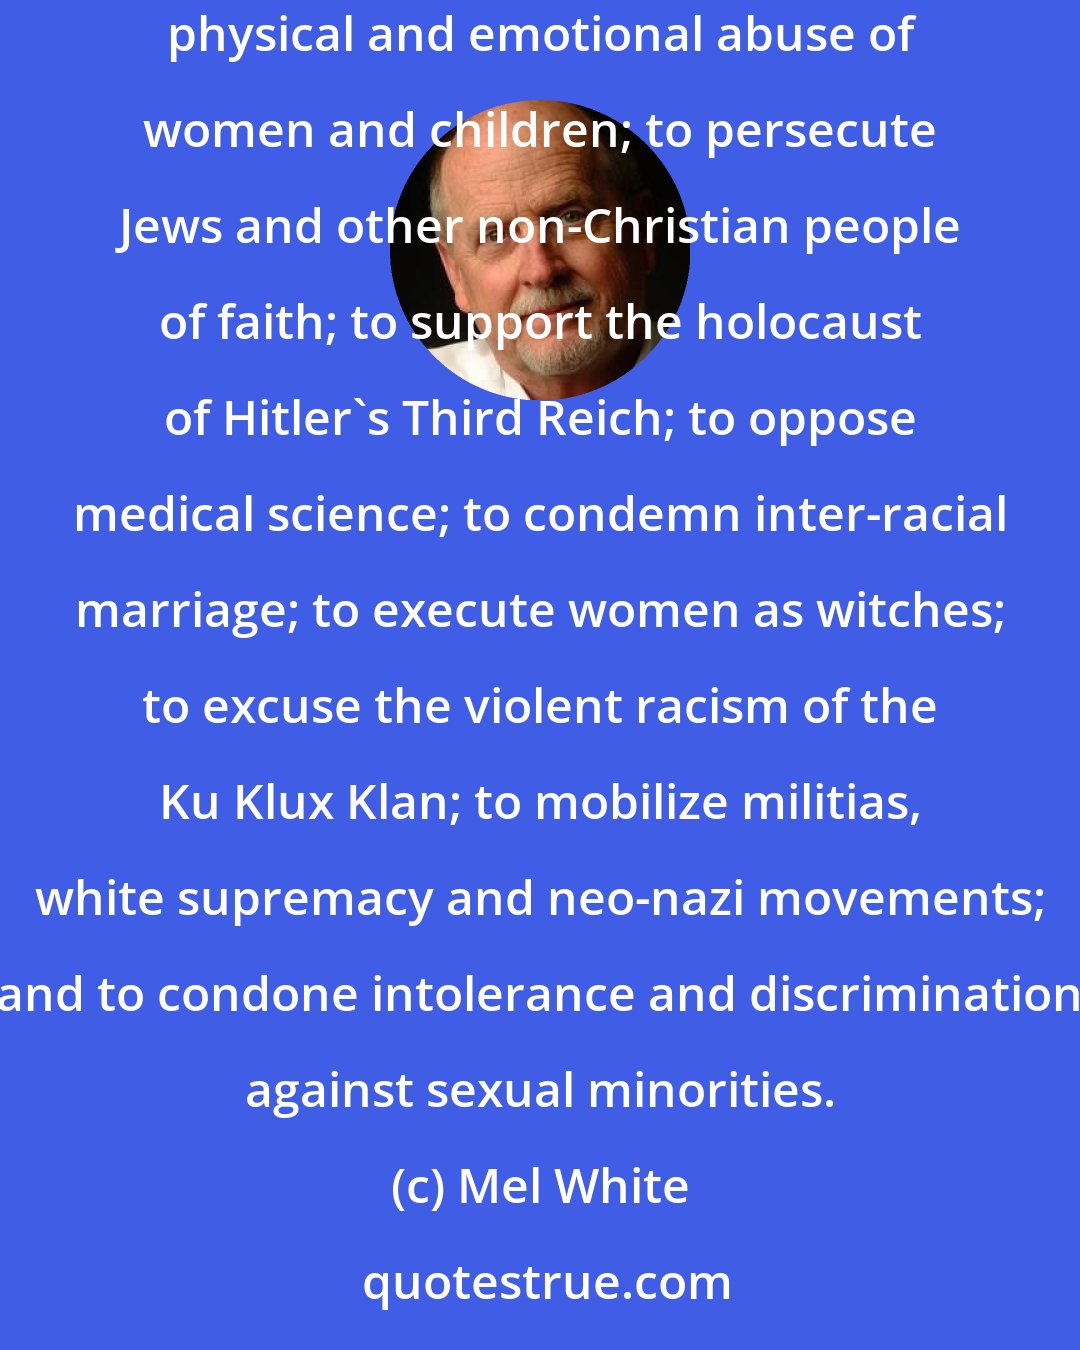 Mel White: The Scriptures have been misused to defend bloody crusades and inquisitions; to support slavery, apartheid, and segregation; to sanction the physical and emotional abuse of women and children; to persecute Jews and other non-Christian people of faith; to support the holocaust of Hitler's Third Reich; to oppose medical science; to condemn inter-racial marriage; to execute women as witches; to excuse the violent racism of the Ku Klux Klan; to mobilize militias, white supremacy and neo-nazi movements; and to condone intolerance and discrimination against sexual minorities.